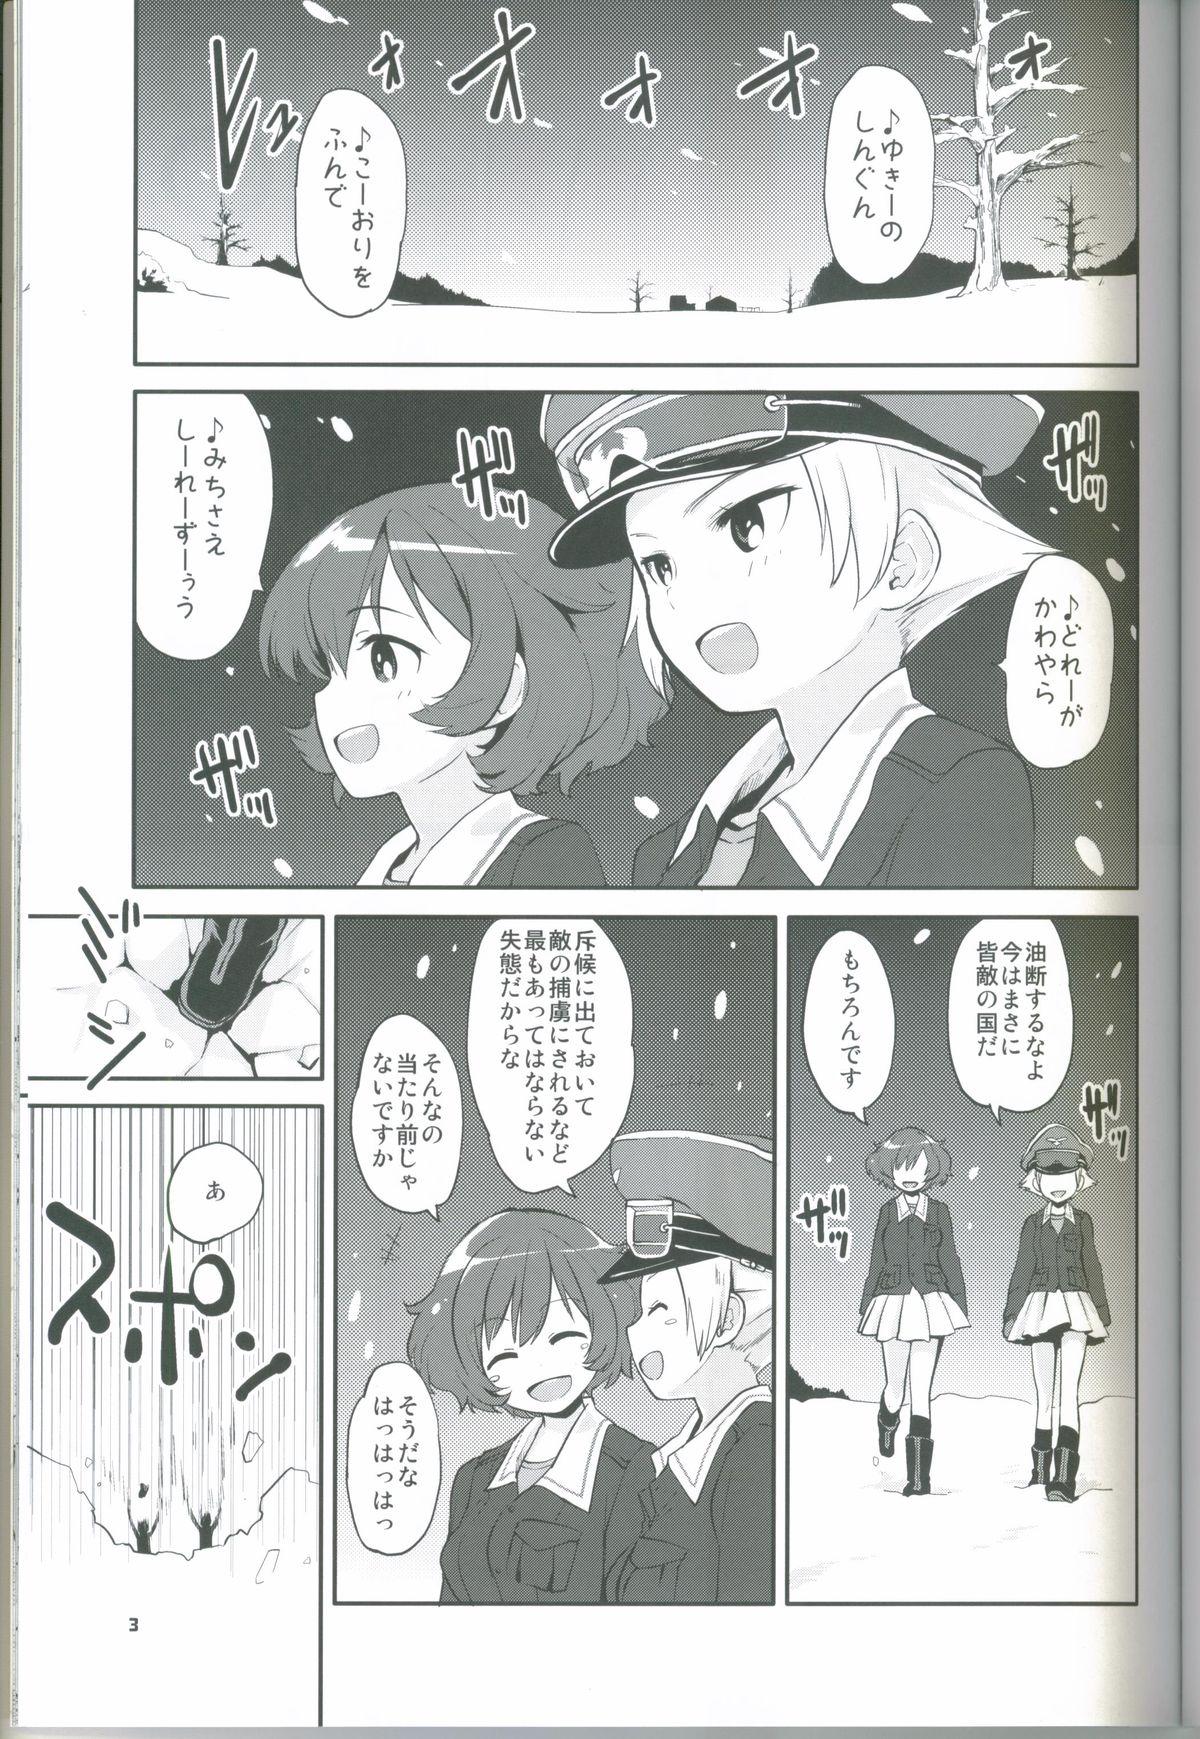 Punheta The General Frost Has Come! - Girls und panzer Climax - Page 2